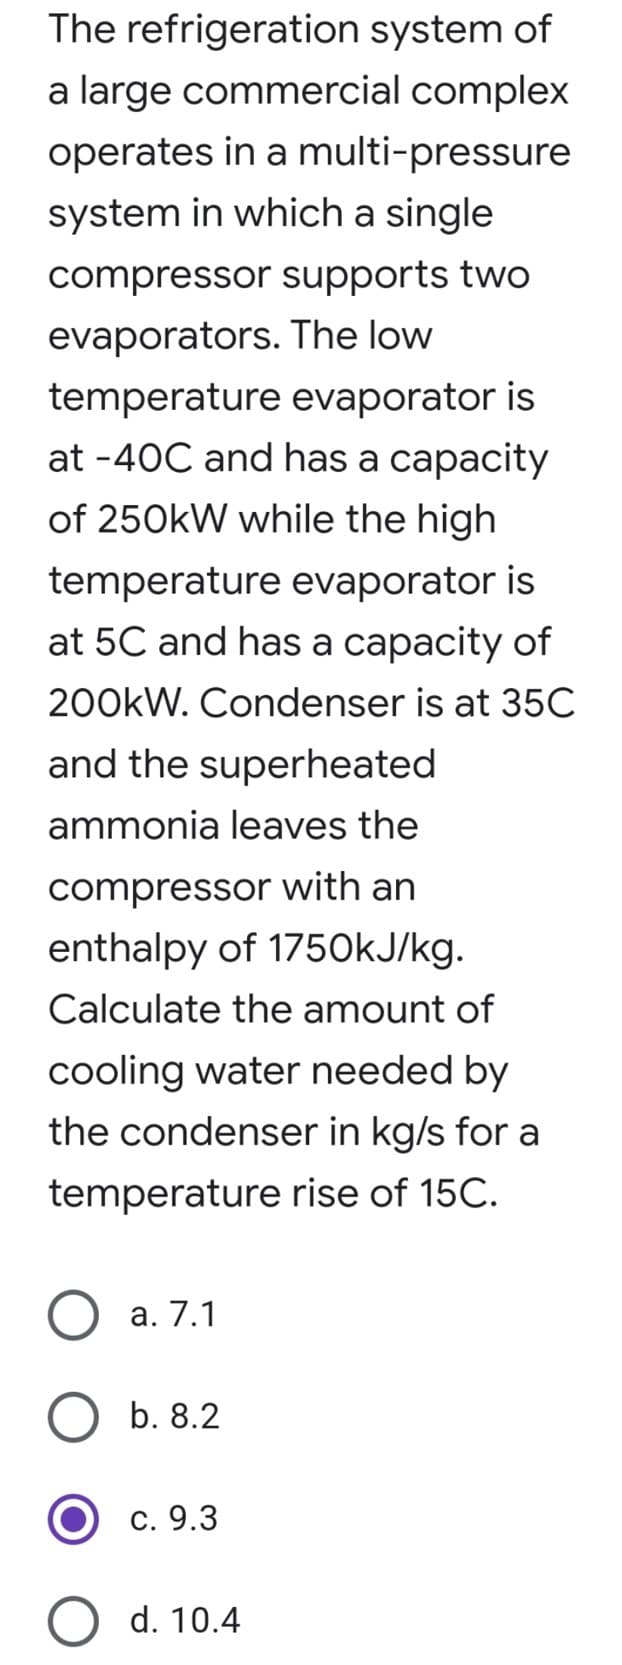 The refrigeration system of
a large commercial complex
operates in a multi-pressure
system in which a single
compressor supports two
The low
evaporators.
temperature evaporator is
at -40C and has a capacity
of 250kW while the high
temperature evaporator is
at 5C and has a capacity of
200kW. Condenser is at 35C
and the superheated
ammonia leaves the
compressor with an
enthalpy of 1750kJ/kg.
Calculate the amount of
cooling water needed by
the condenser in kg/s for a
temperature rise of 15C.
a. 7.1
b. 8.2
c. 9.3
d. 10.4